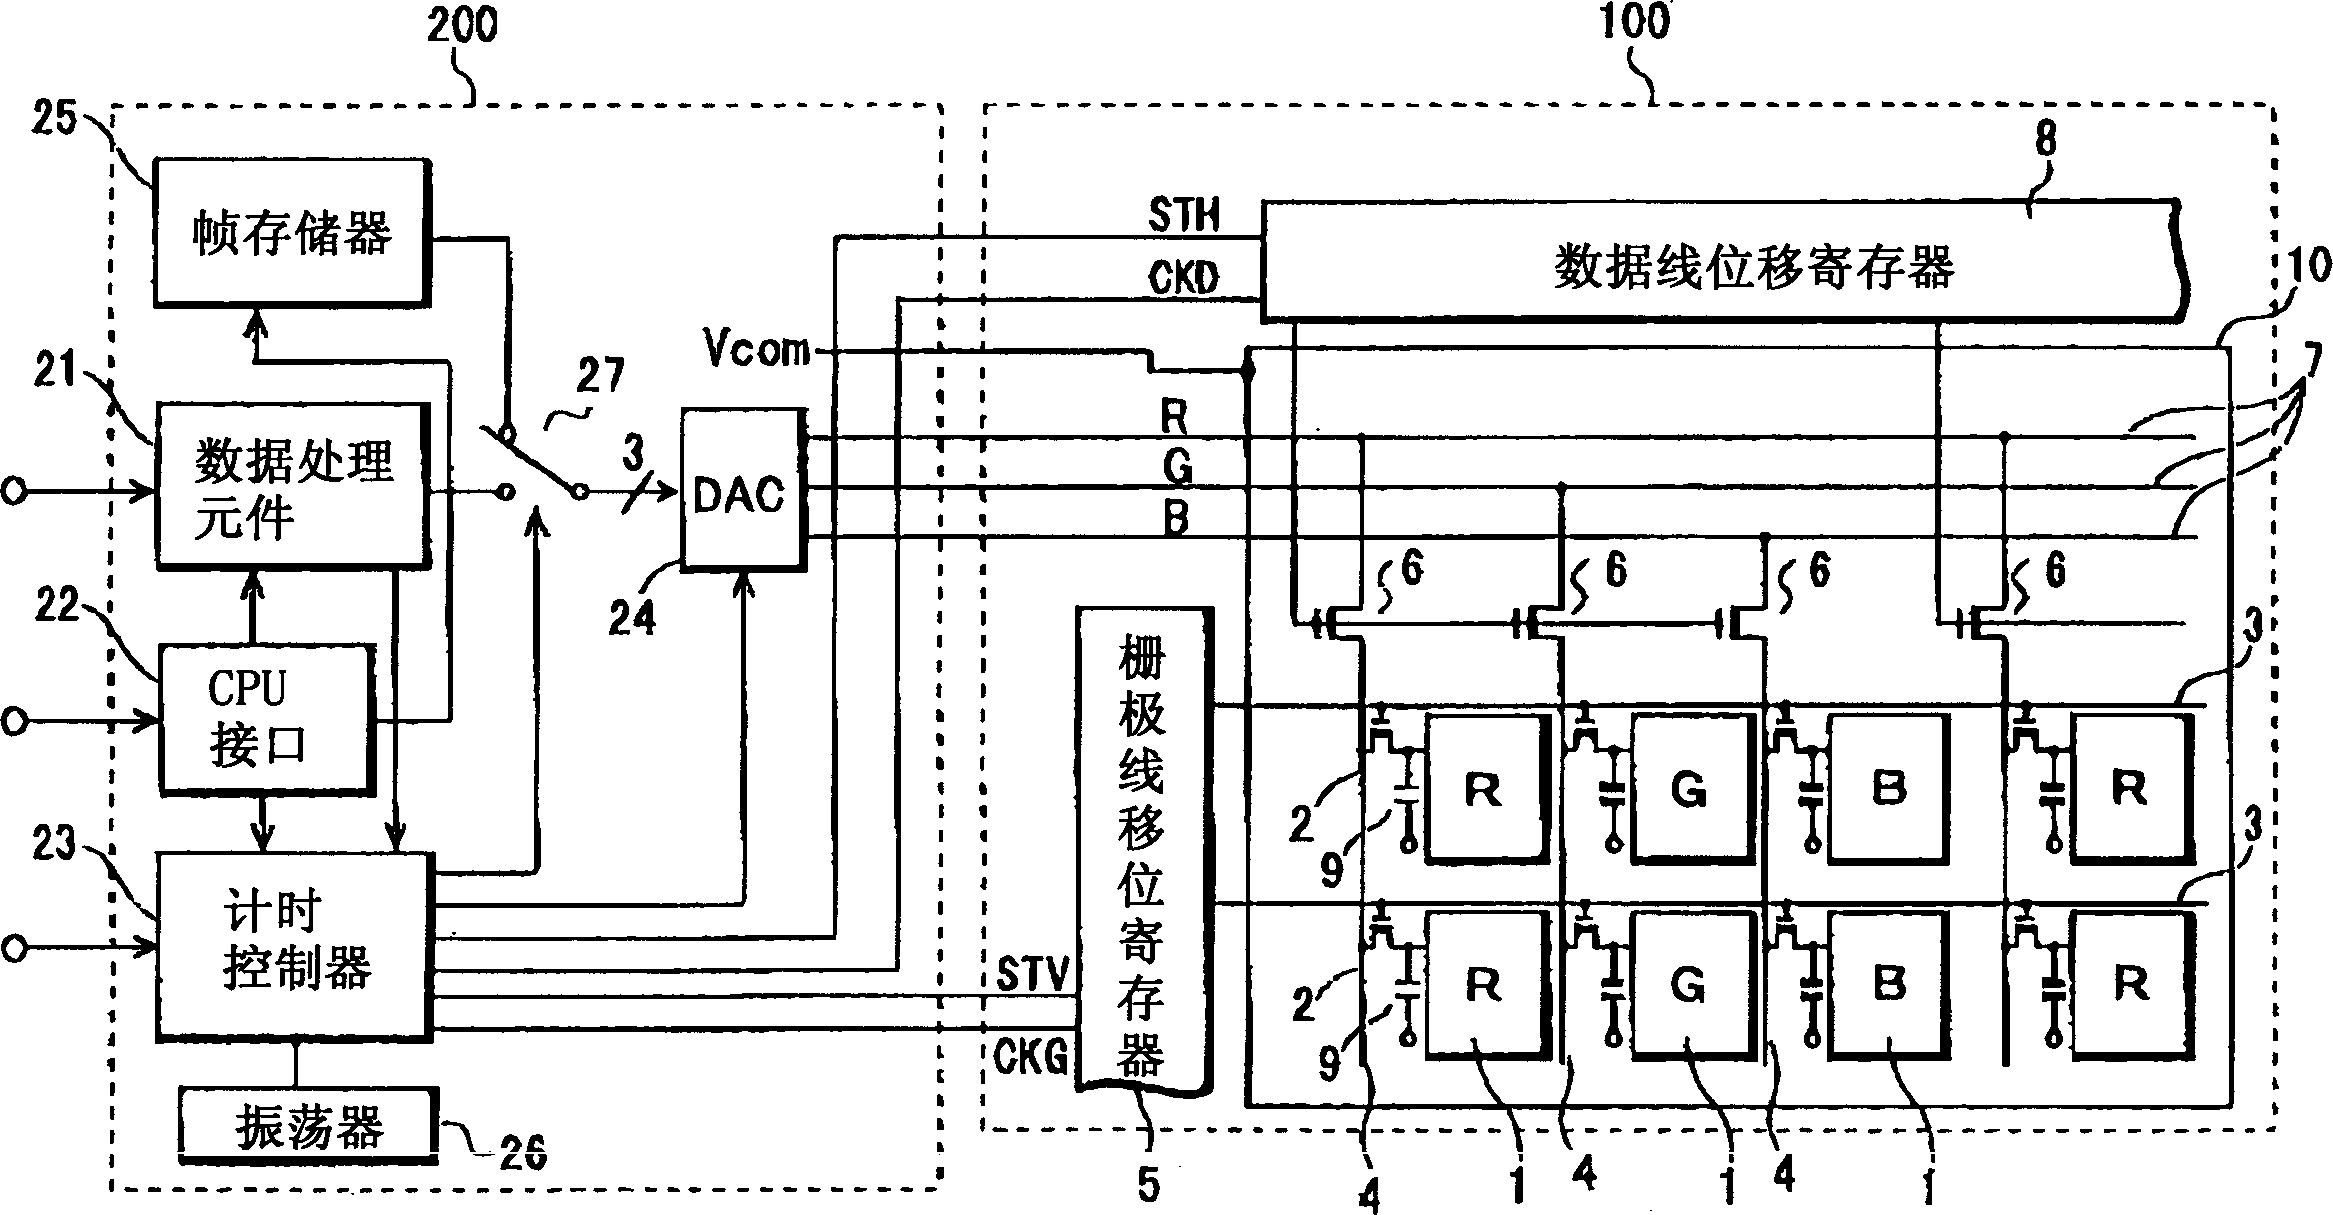 Active matric-type display device and its controller